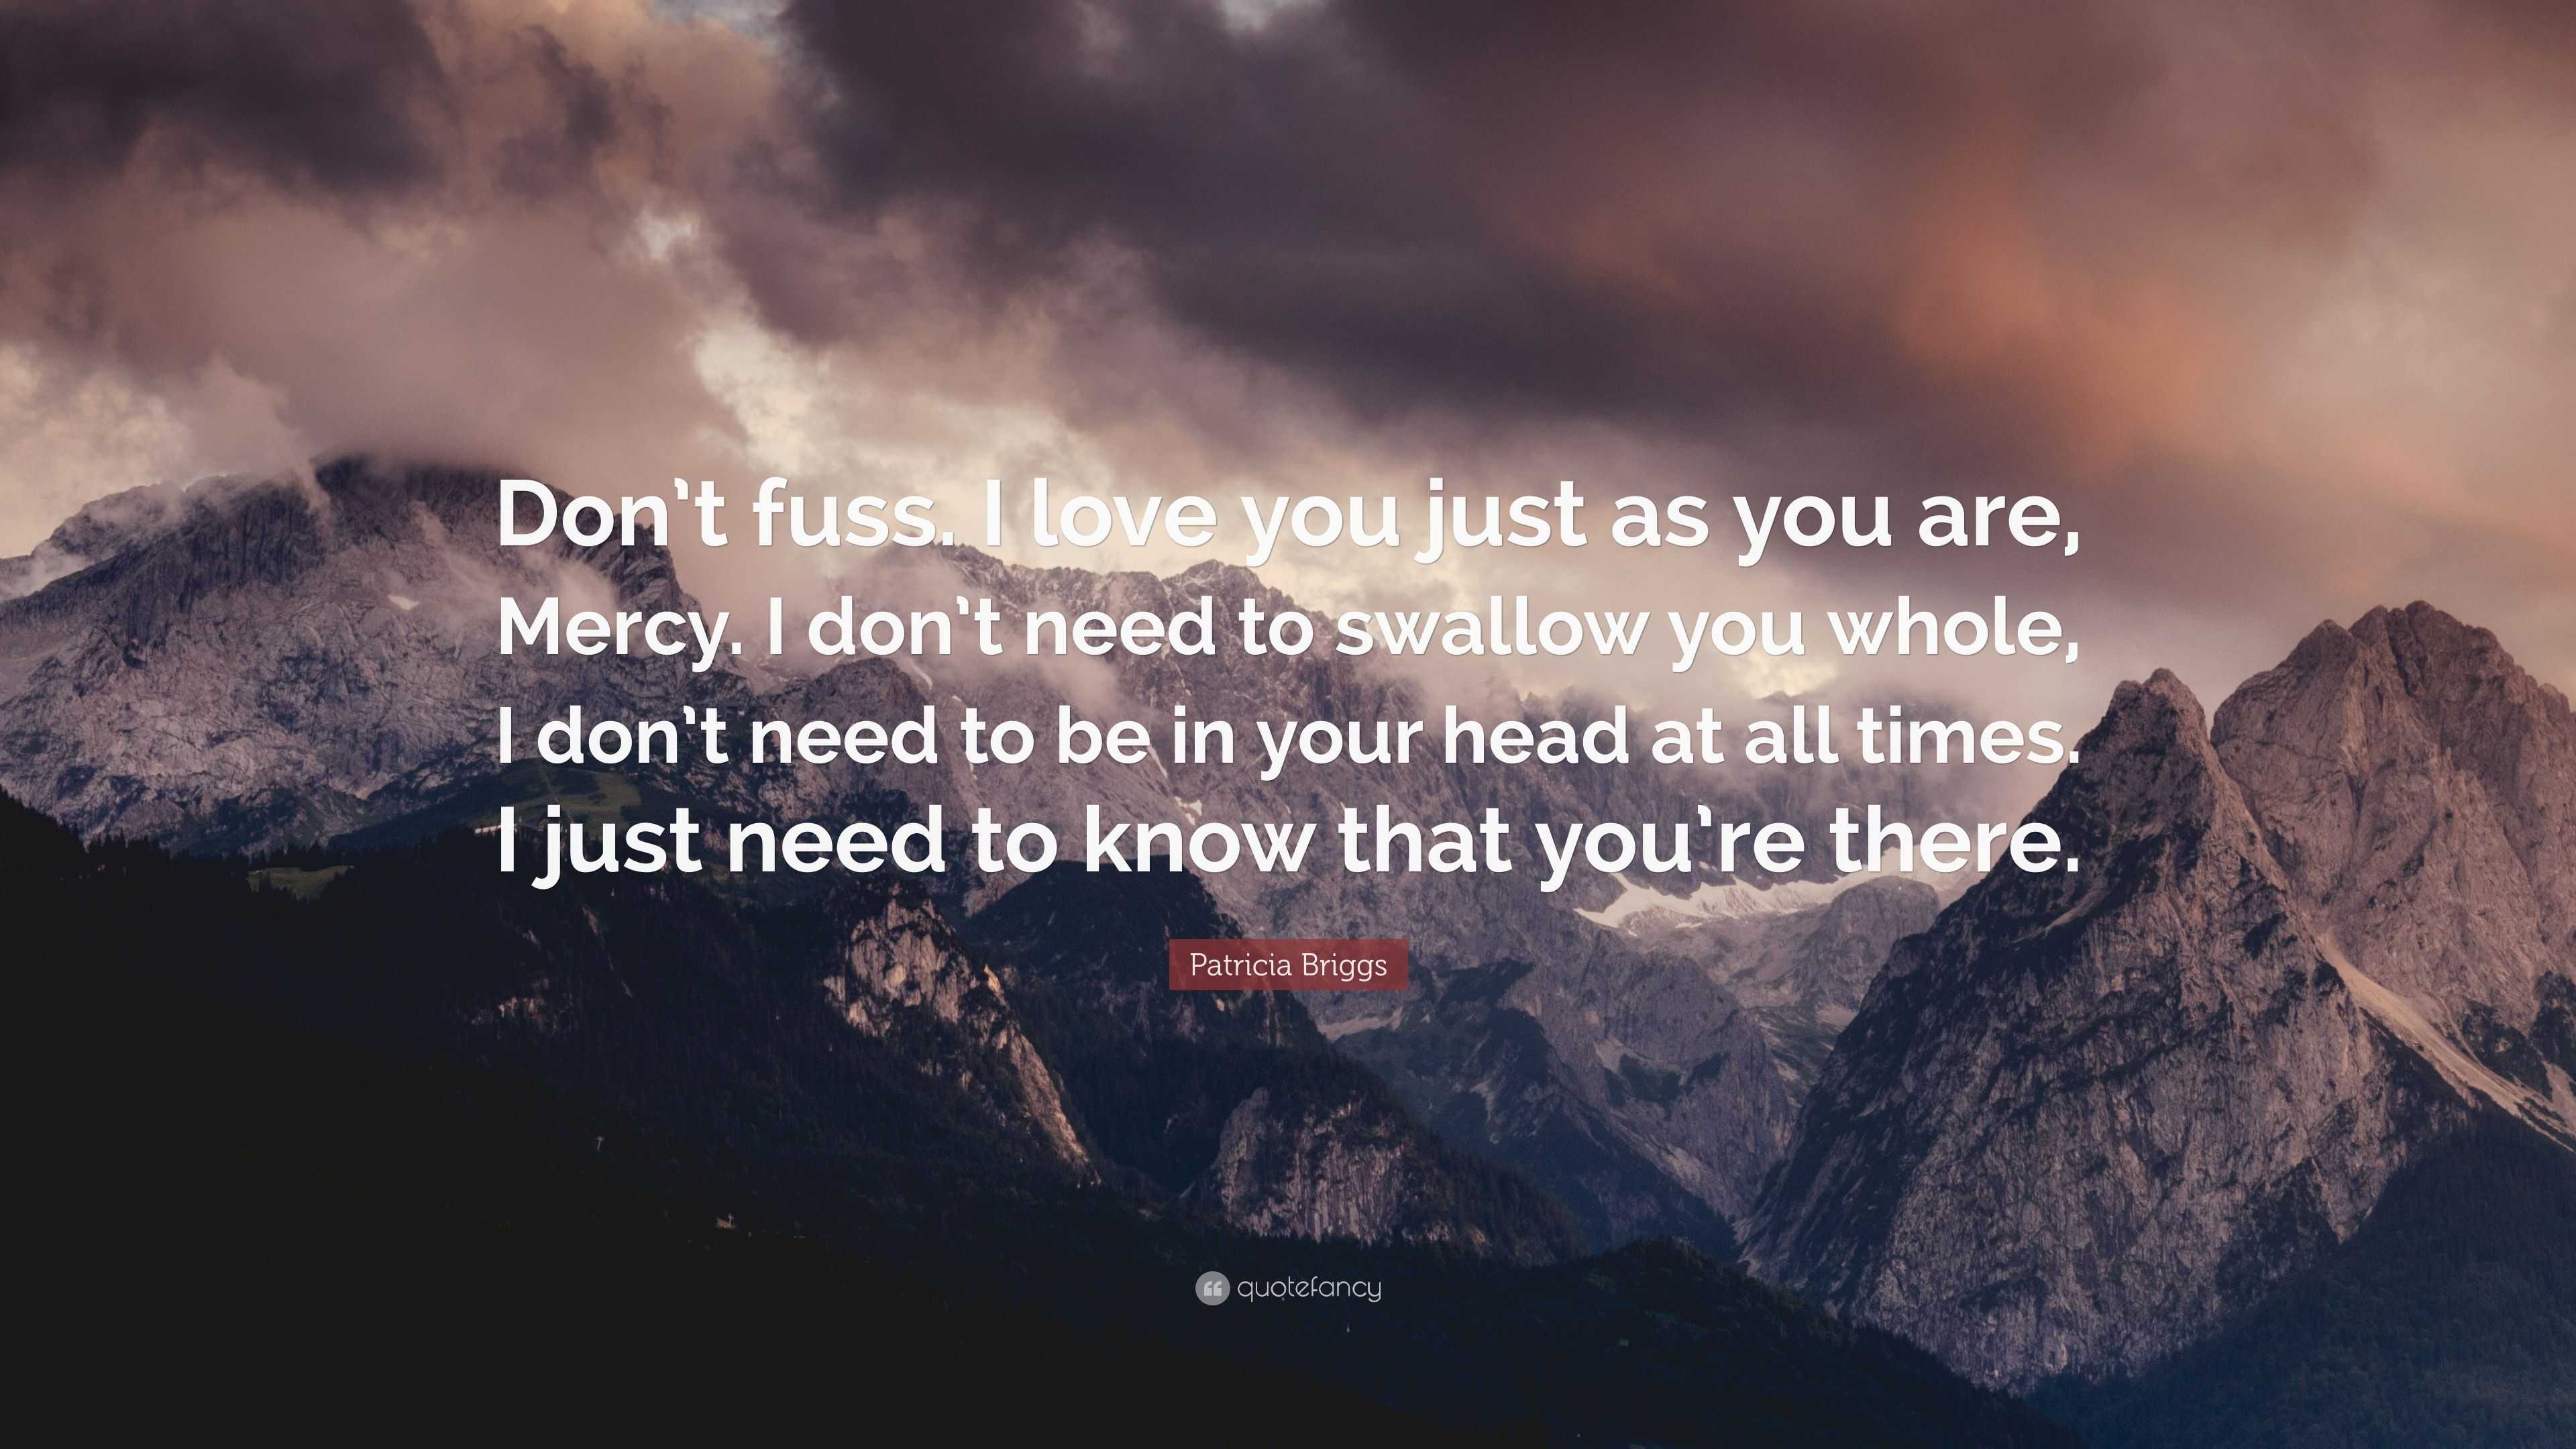 Patricia Briggs Quote: “Don’t fuss. I love you just as you are, Mercy ...